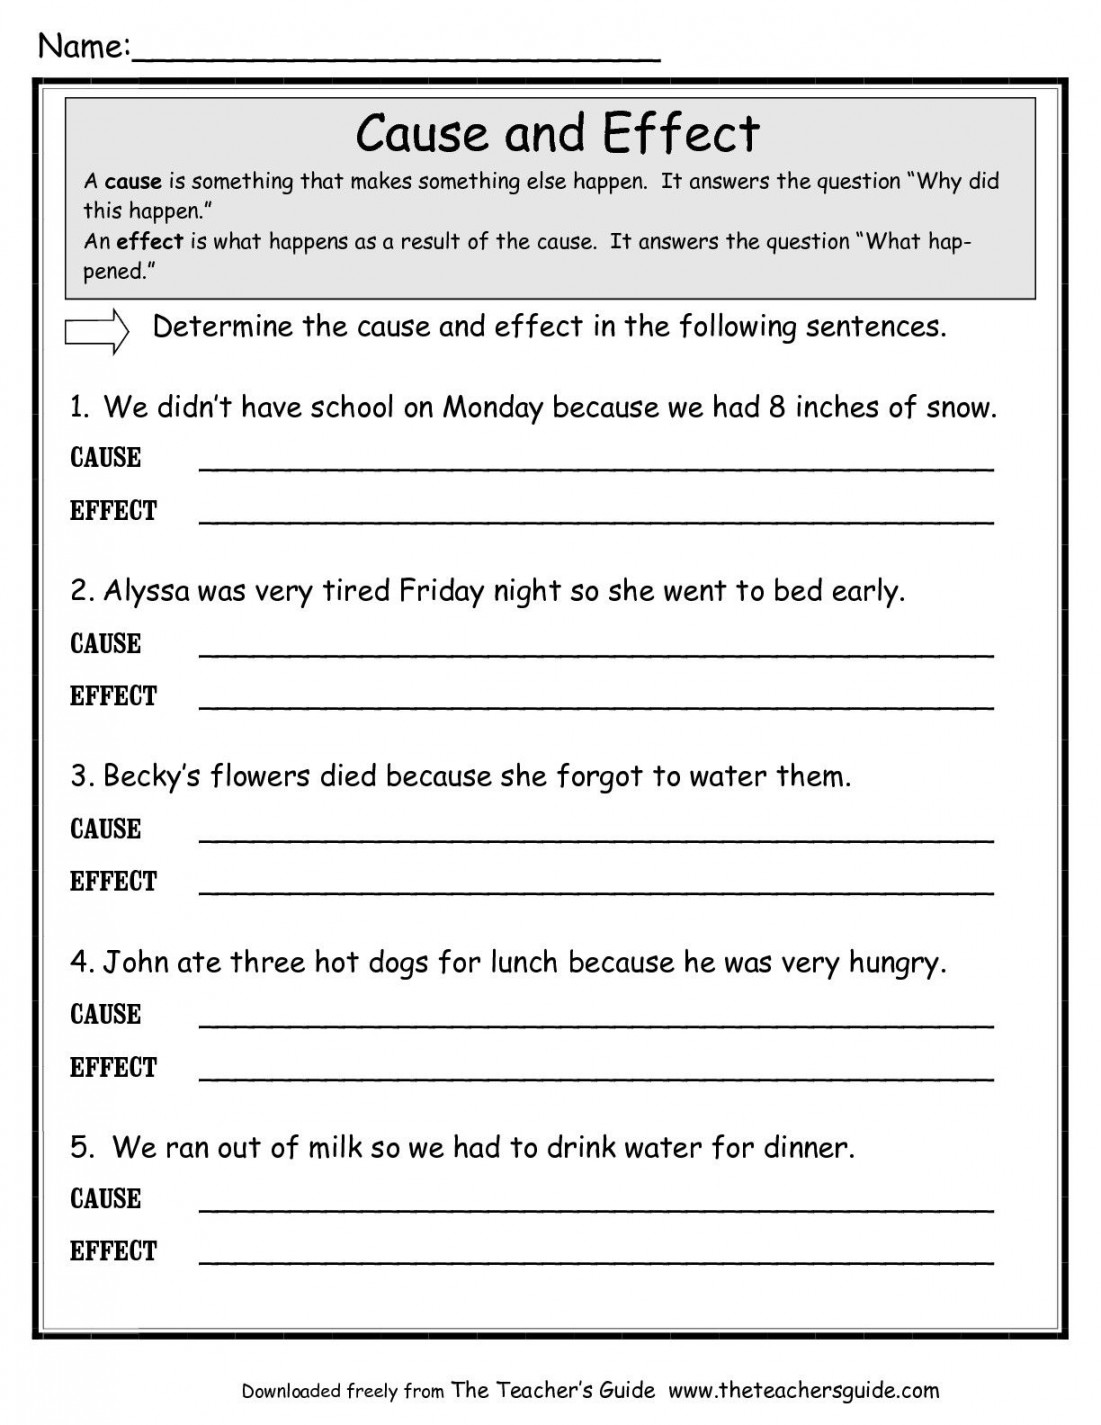 cause and effect worksheet - Google Search  Cause and effect